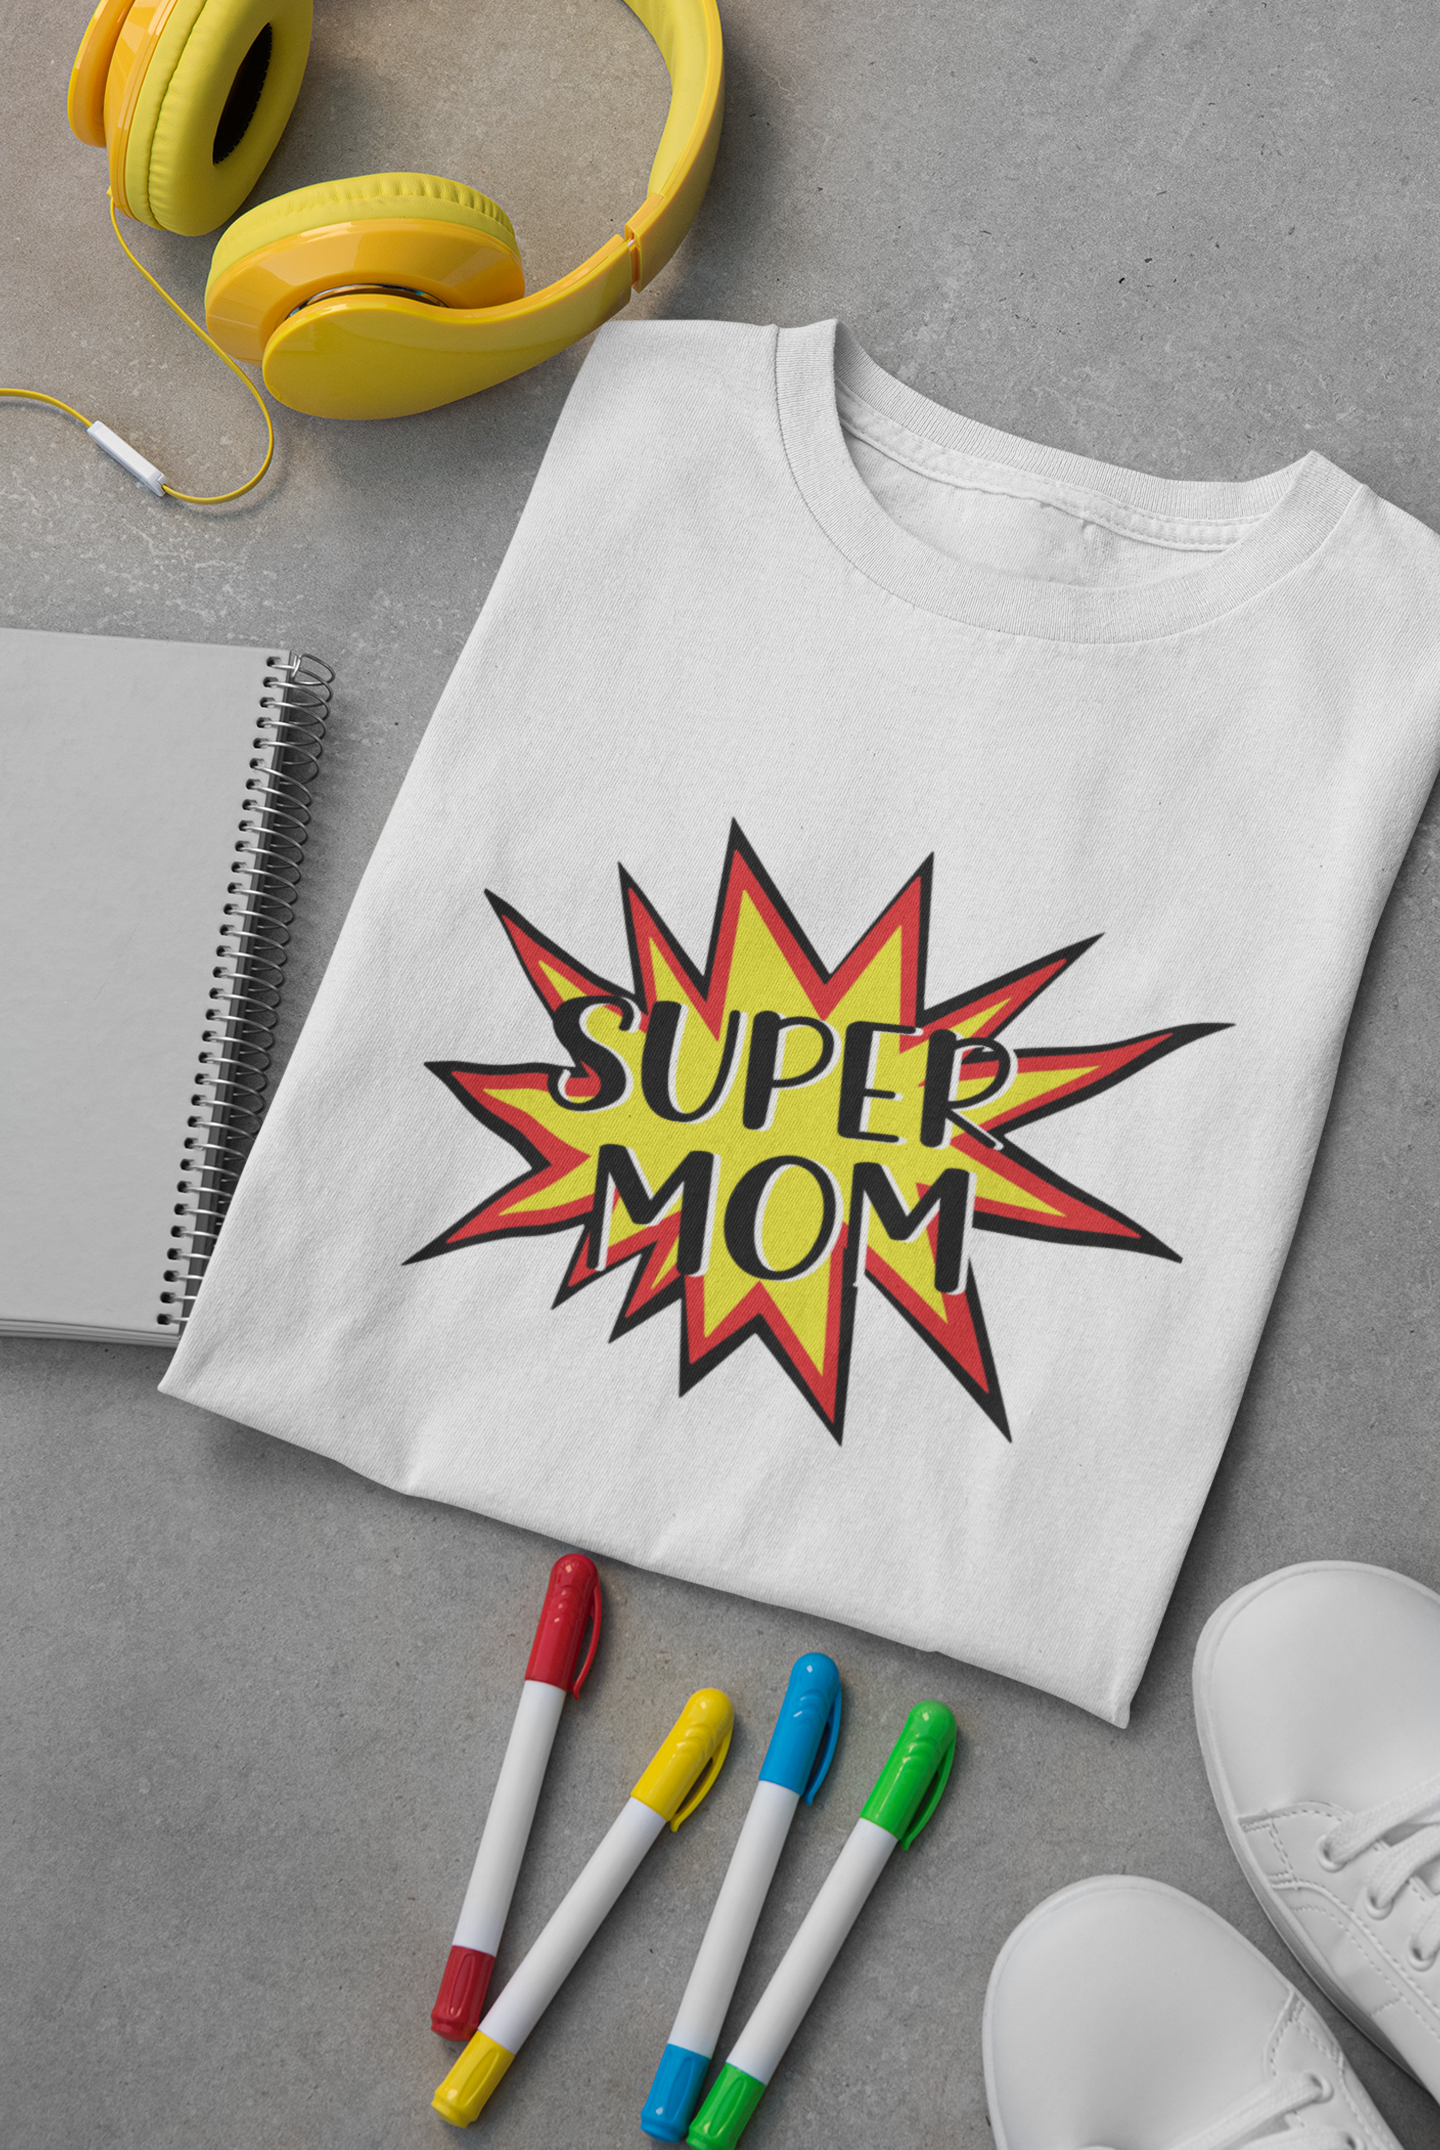 Super Son Mother And Son White Matching T-Shirt- FunkyTeesClub